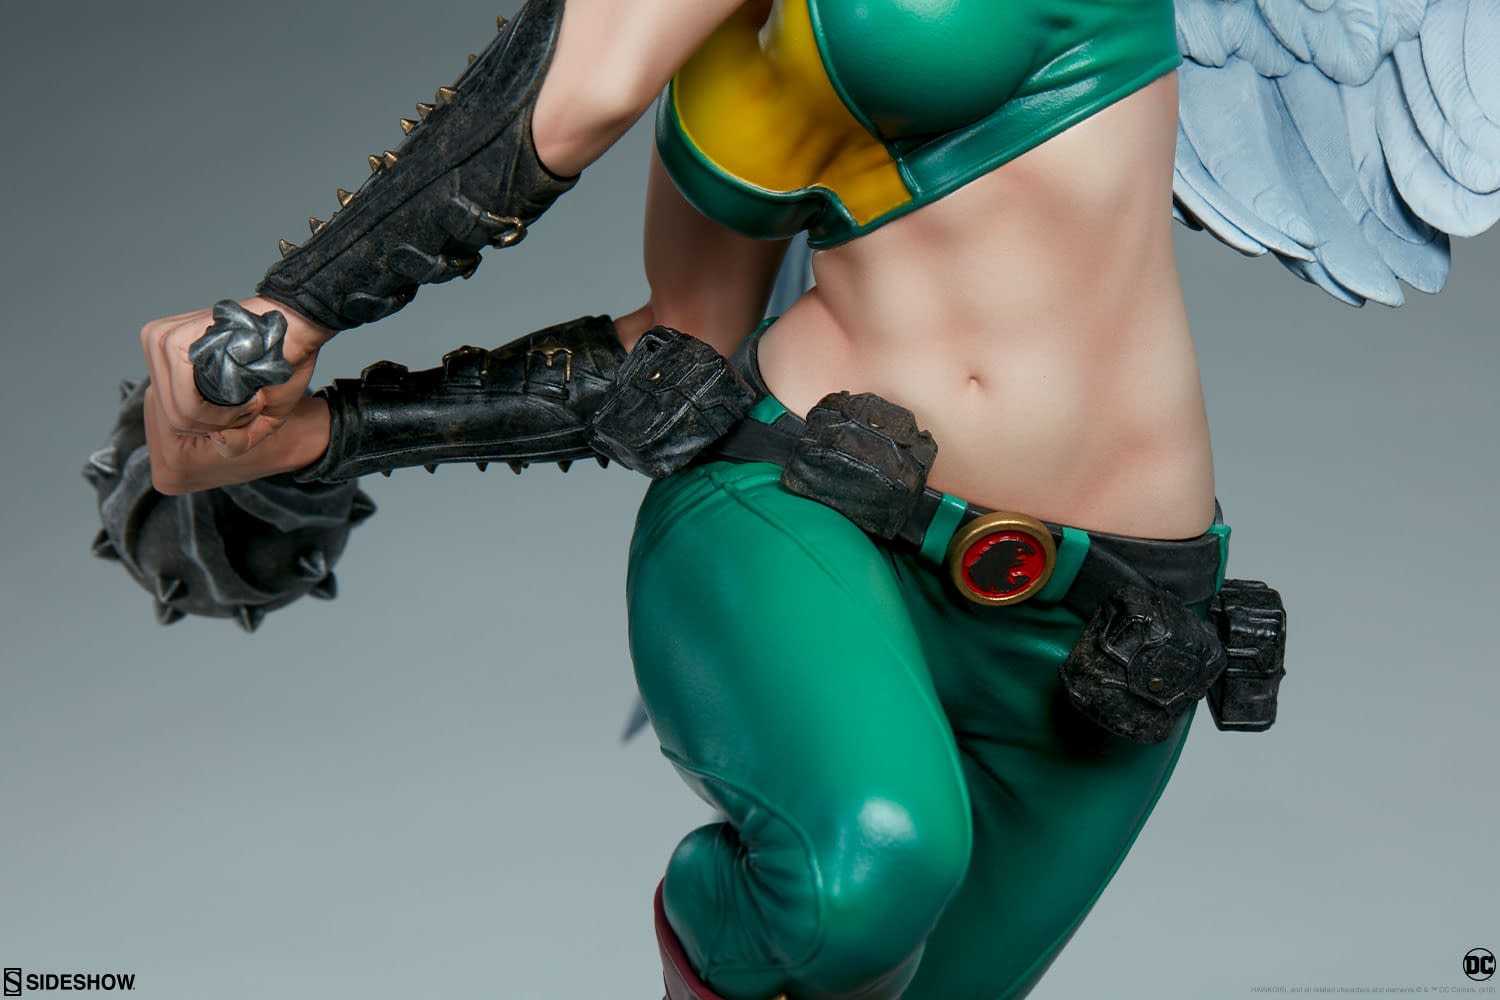 Hawkgirl Flies High with New Statue from Sideshow Collectibles